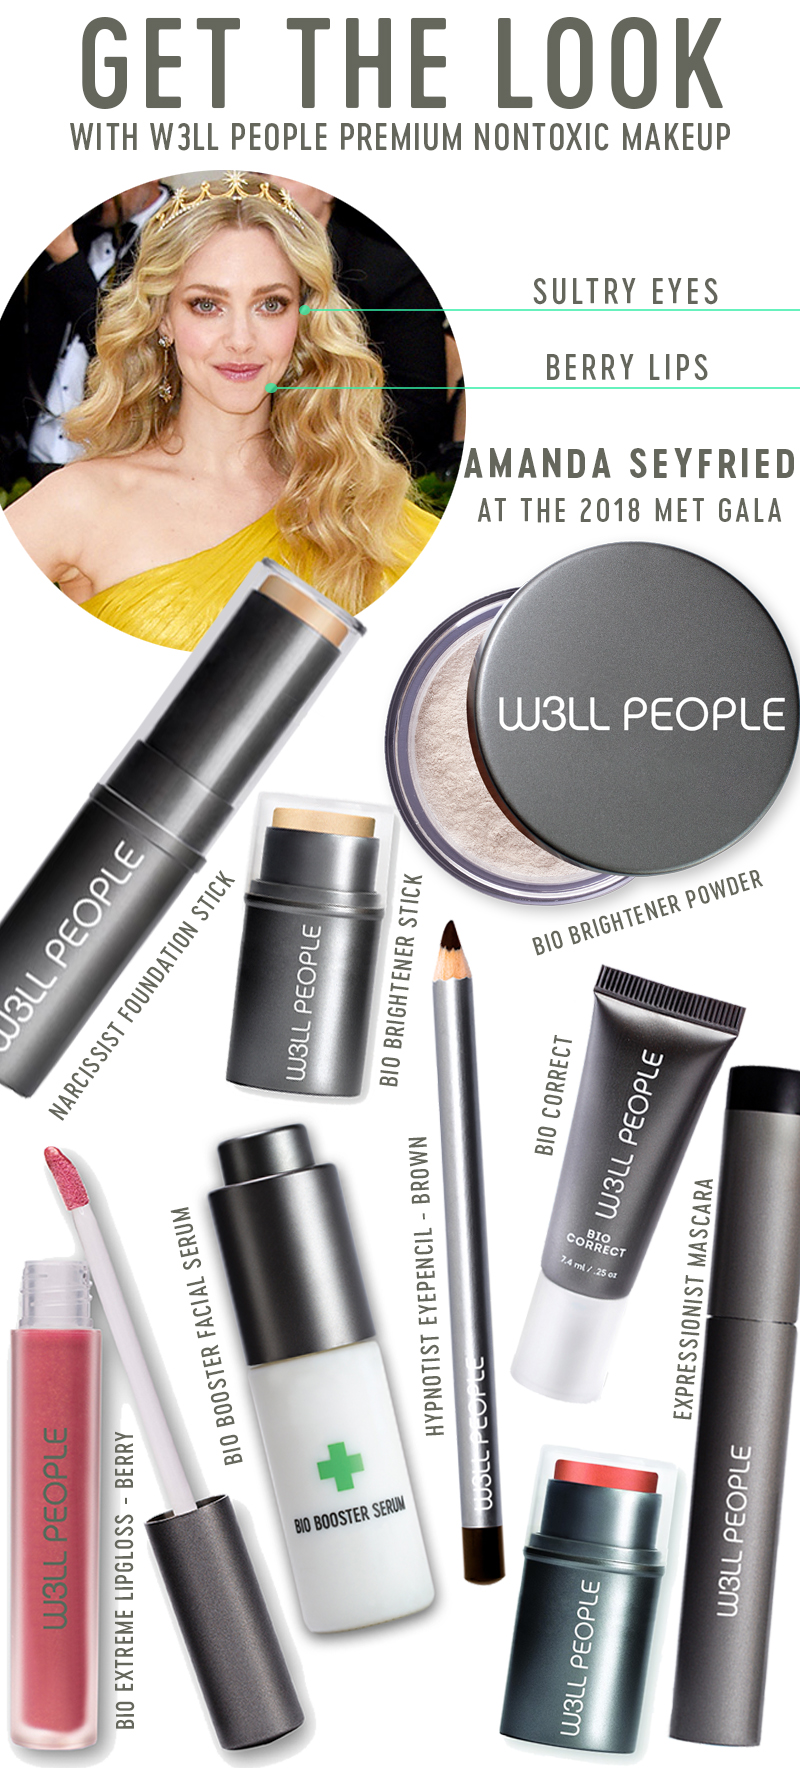 Get Amanda Seyfried's 2018 Met Gala look using all-natural, nontoxic products from W3LL PEOPLE! 